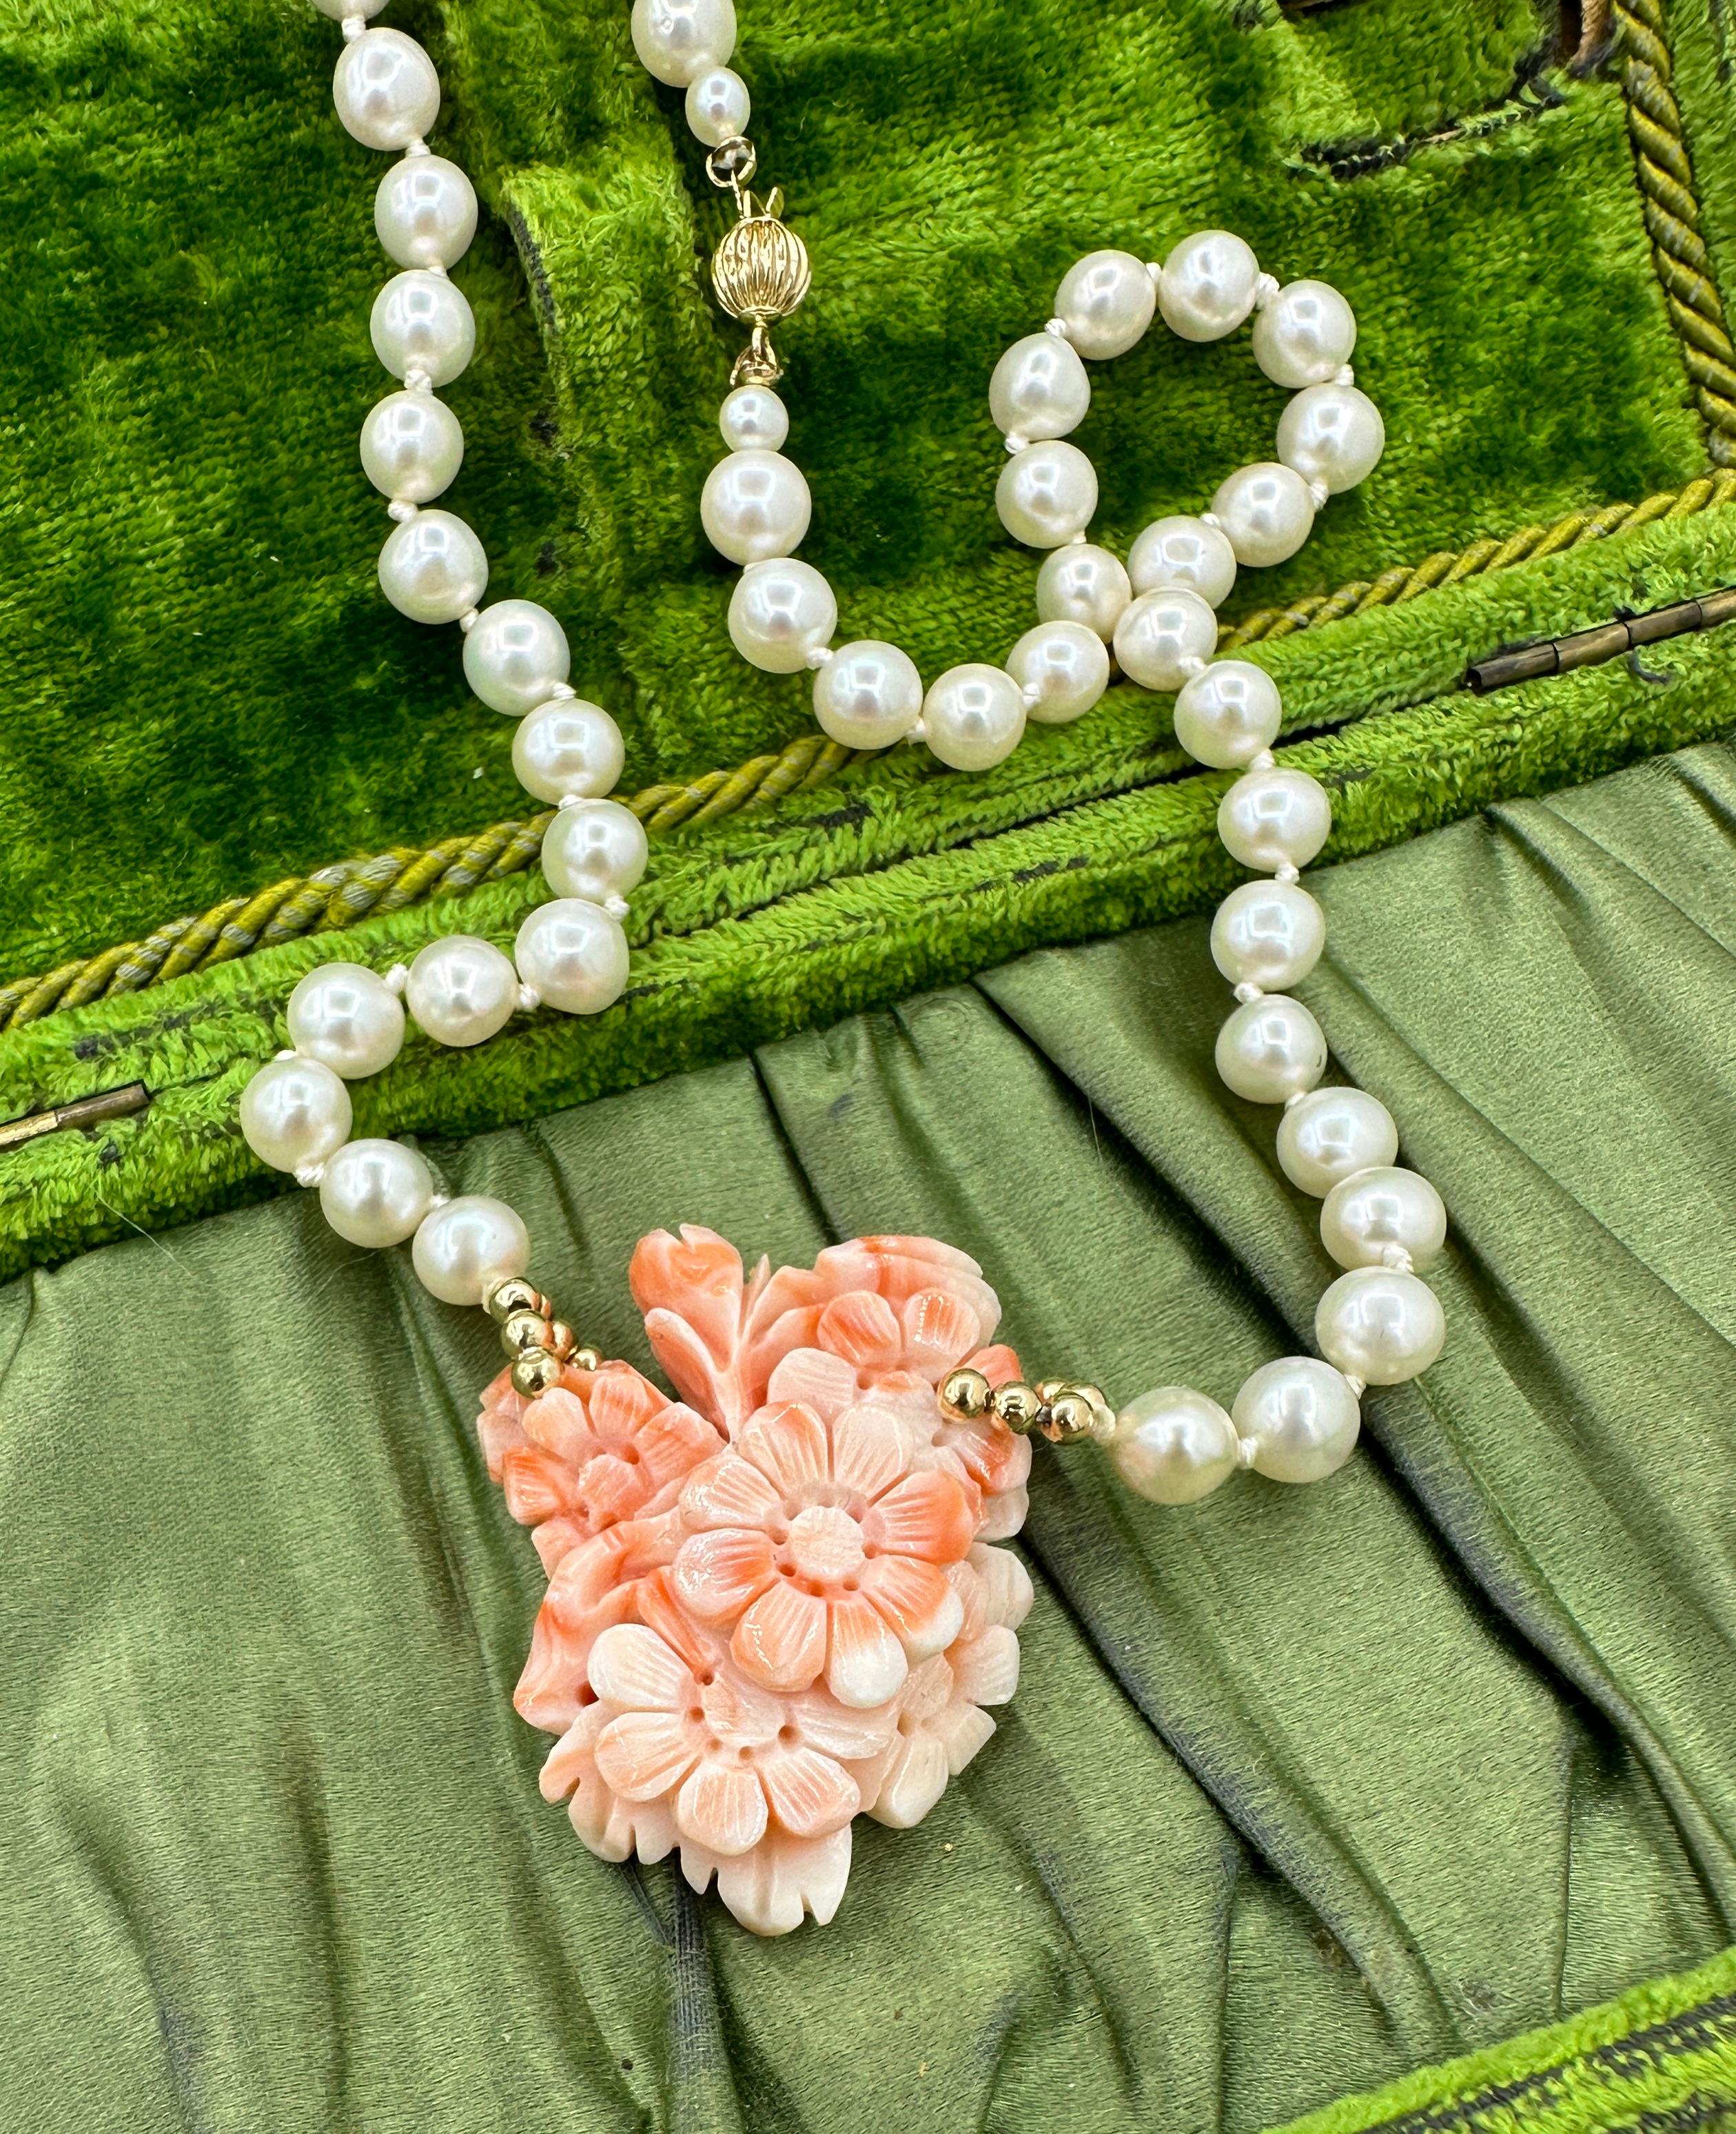 This is a stunning antique salmon colored Coral and Pearl Necklace with a beautiful hand carved Coral pendant in the form of a flower bouquet with flowers, buds and leaves.  The necklace is further set with 14 Karat Yellow Gold Beads and Clasp.  The